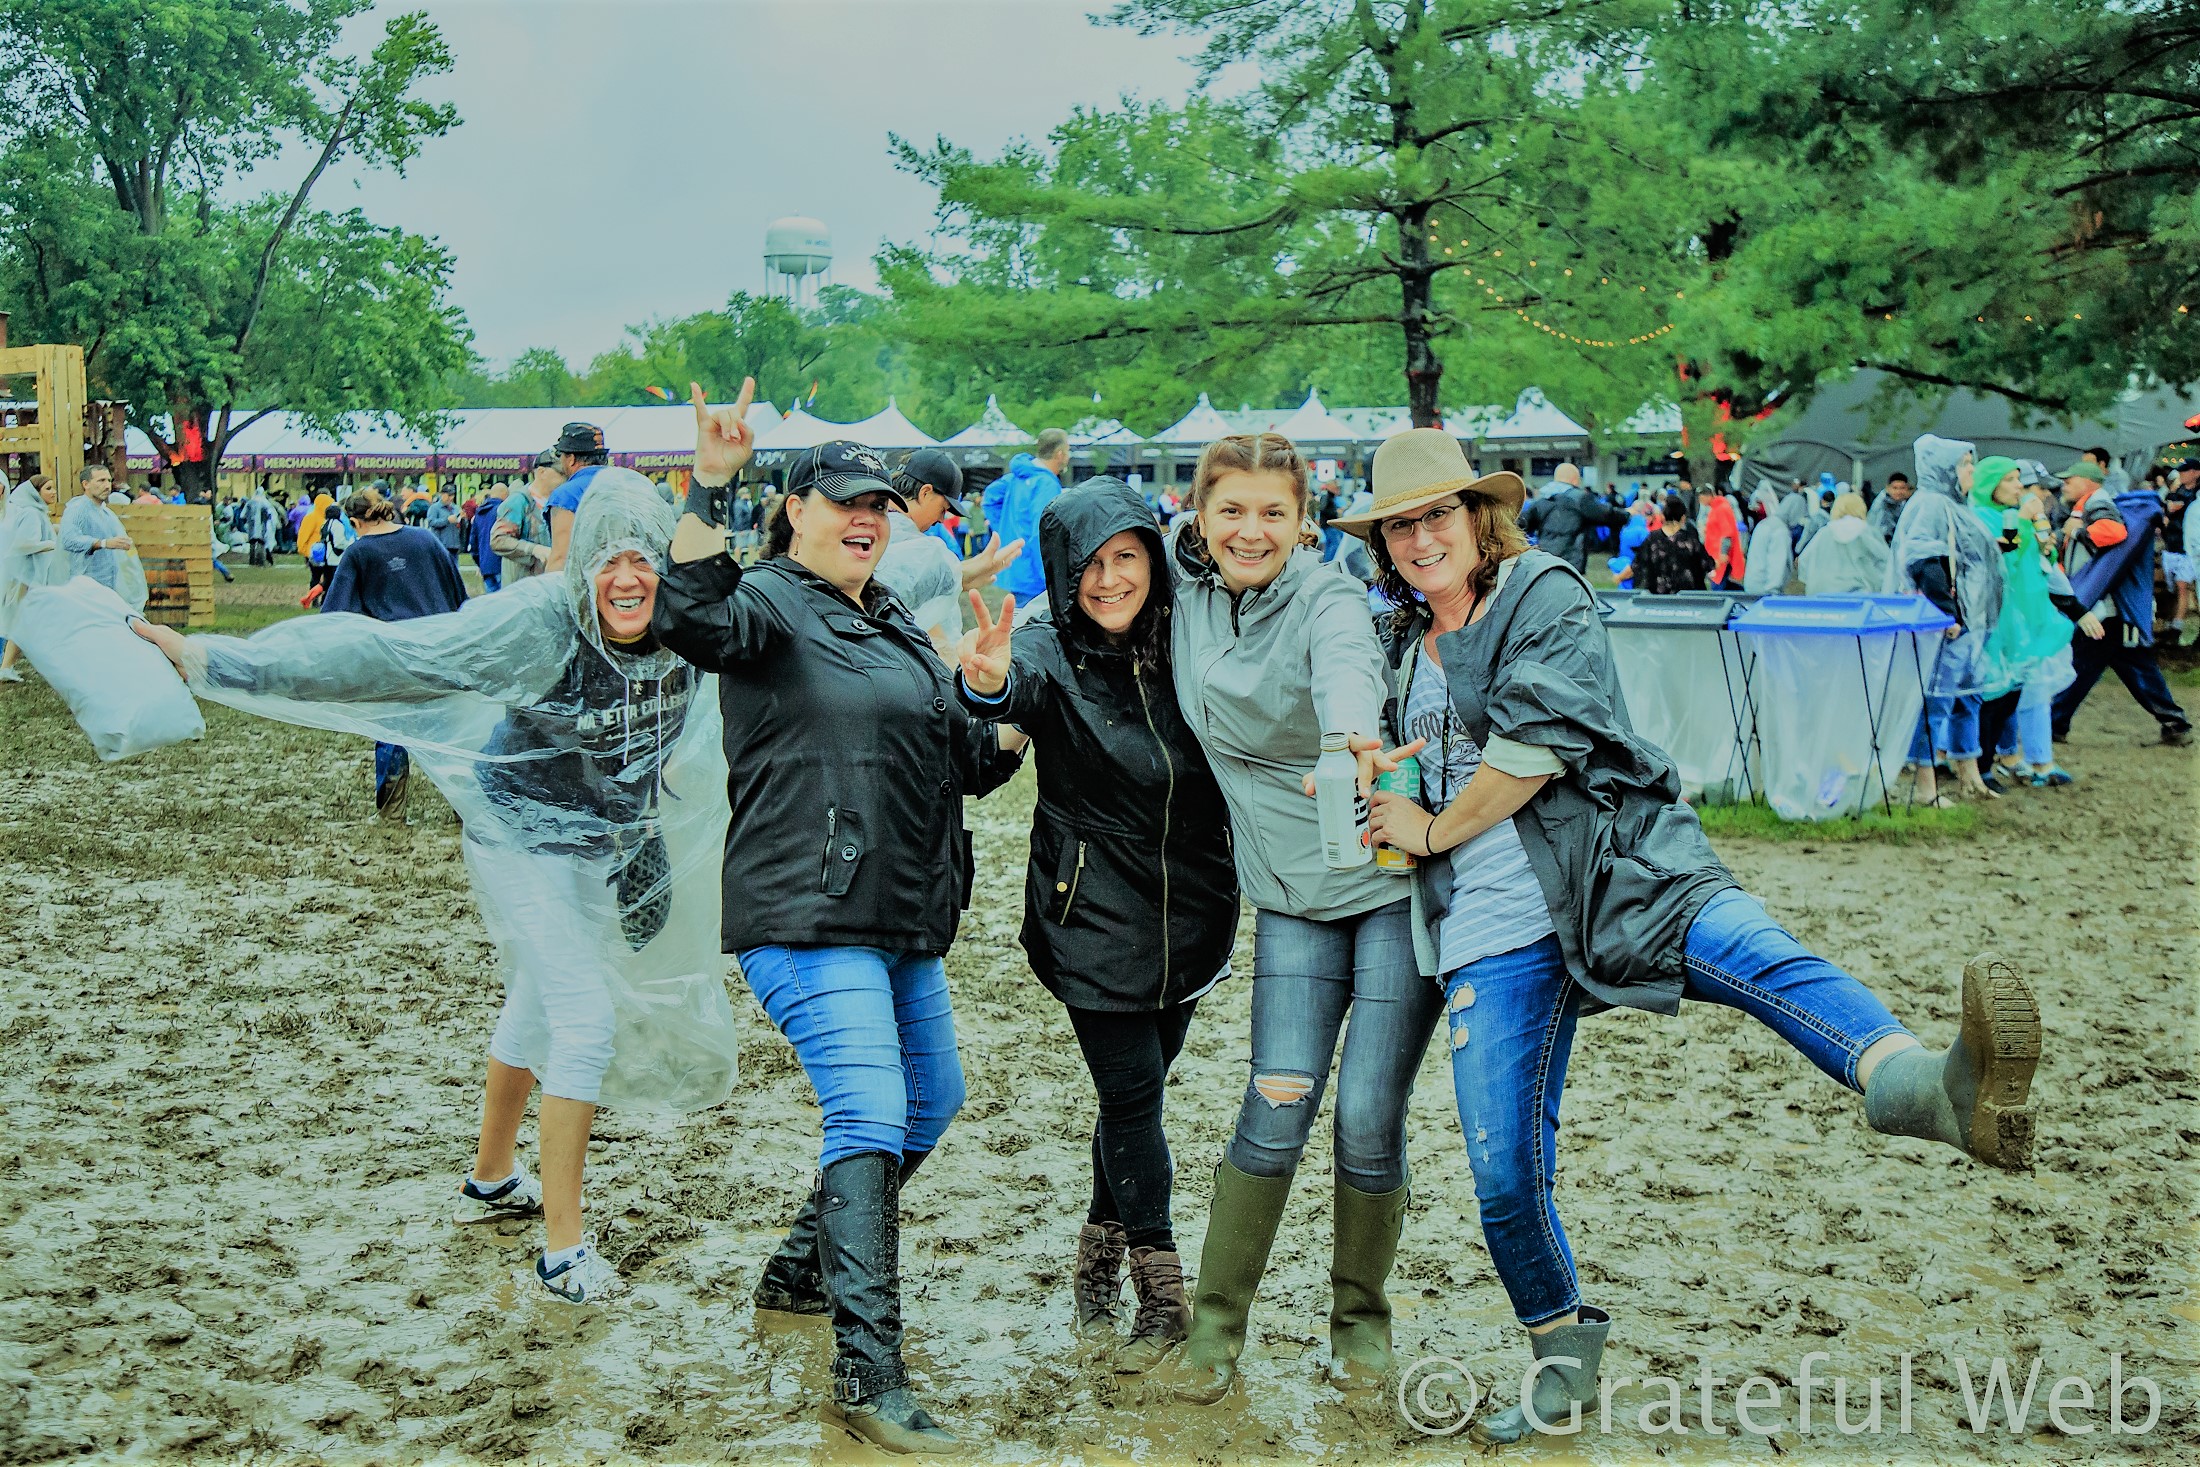 A rainy and fun day @ Bourbon and Beyond 2018